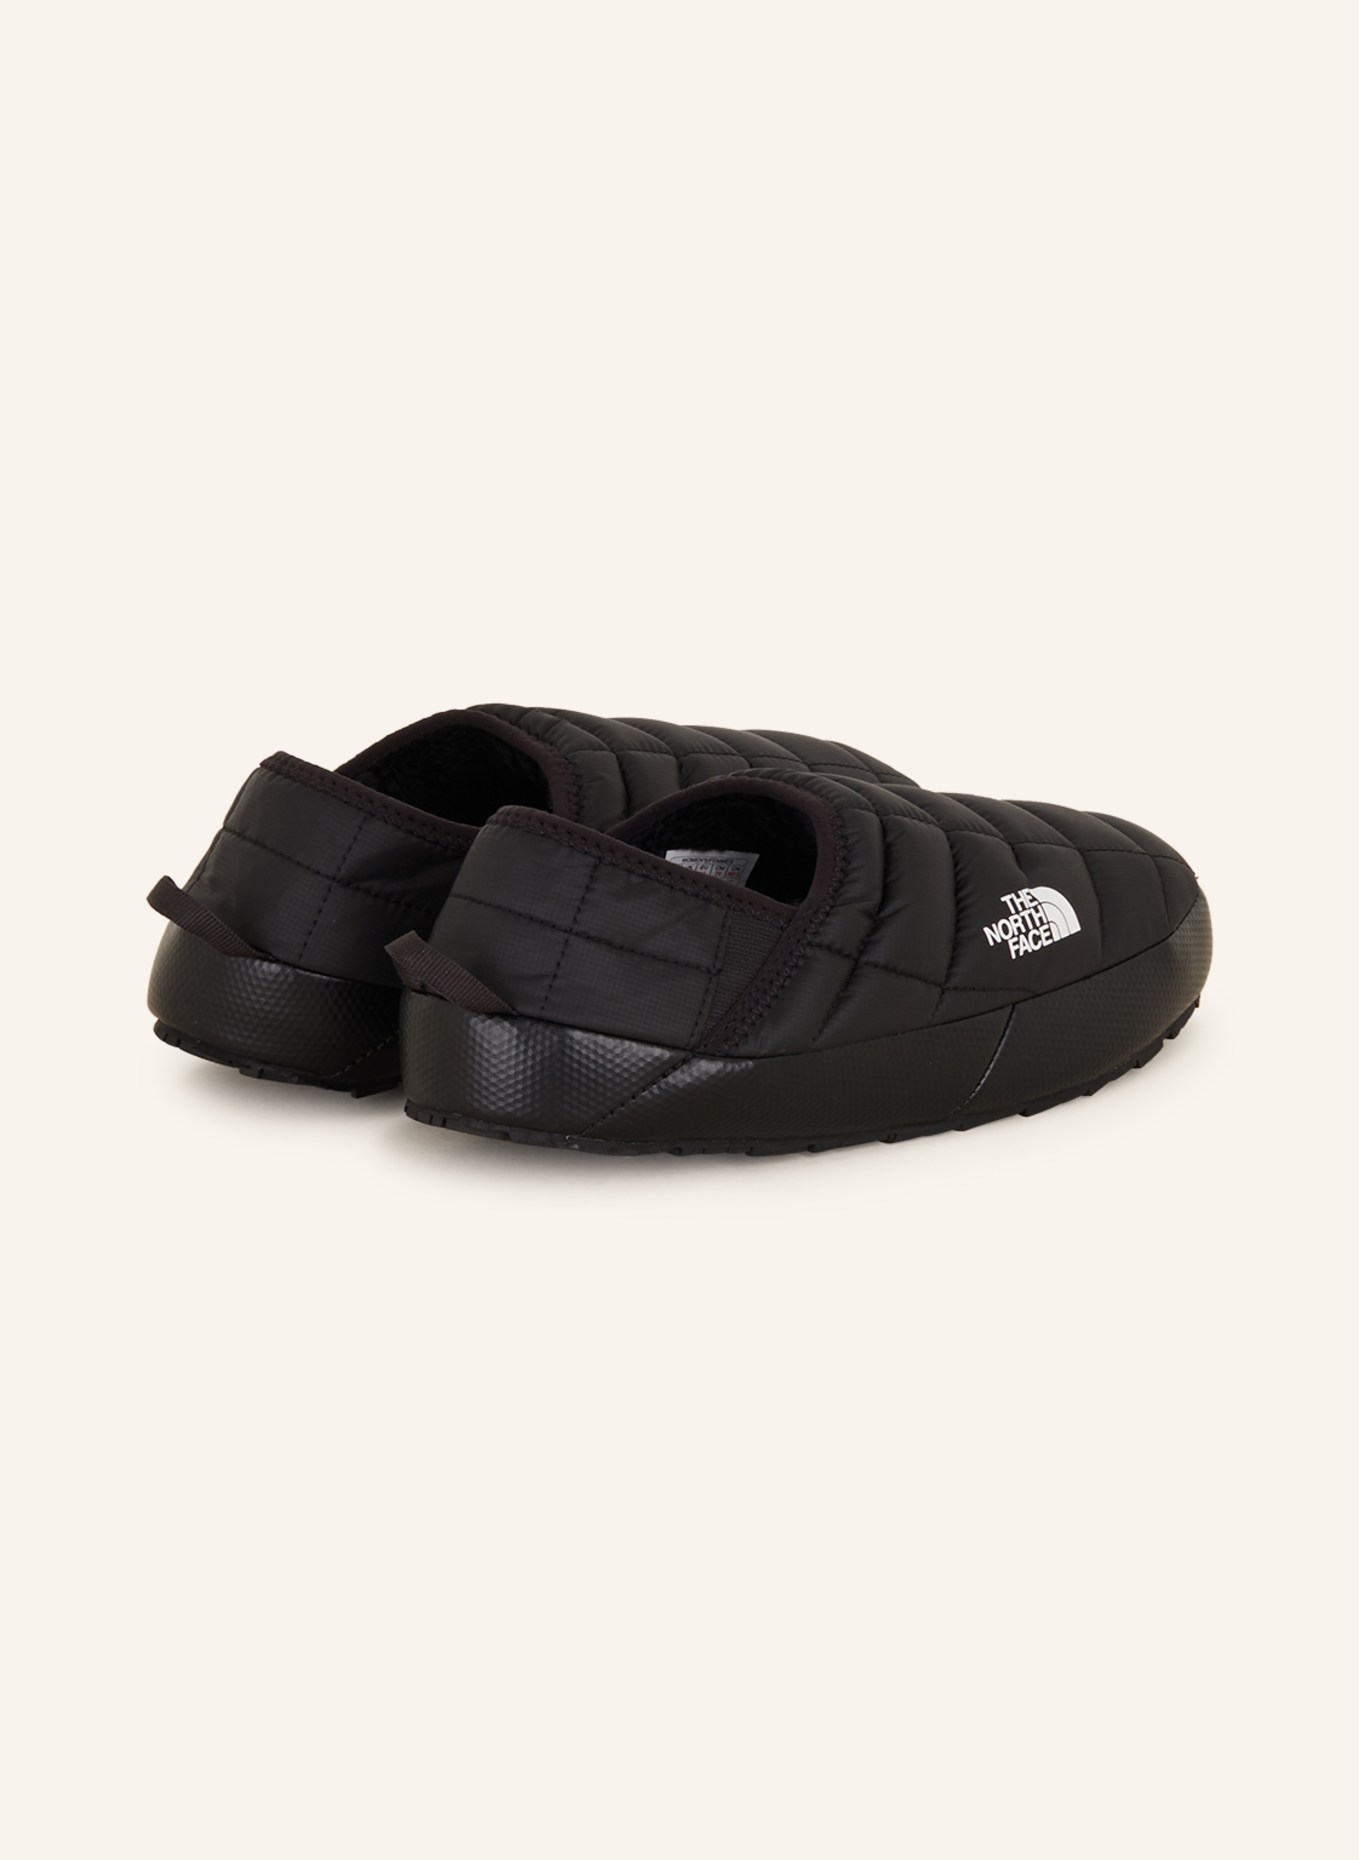 THE NORTH FACE Hausschuhe THERMOBALL™ V TRACTION, Farbe: SCHWARZ (Bild 2)